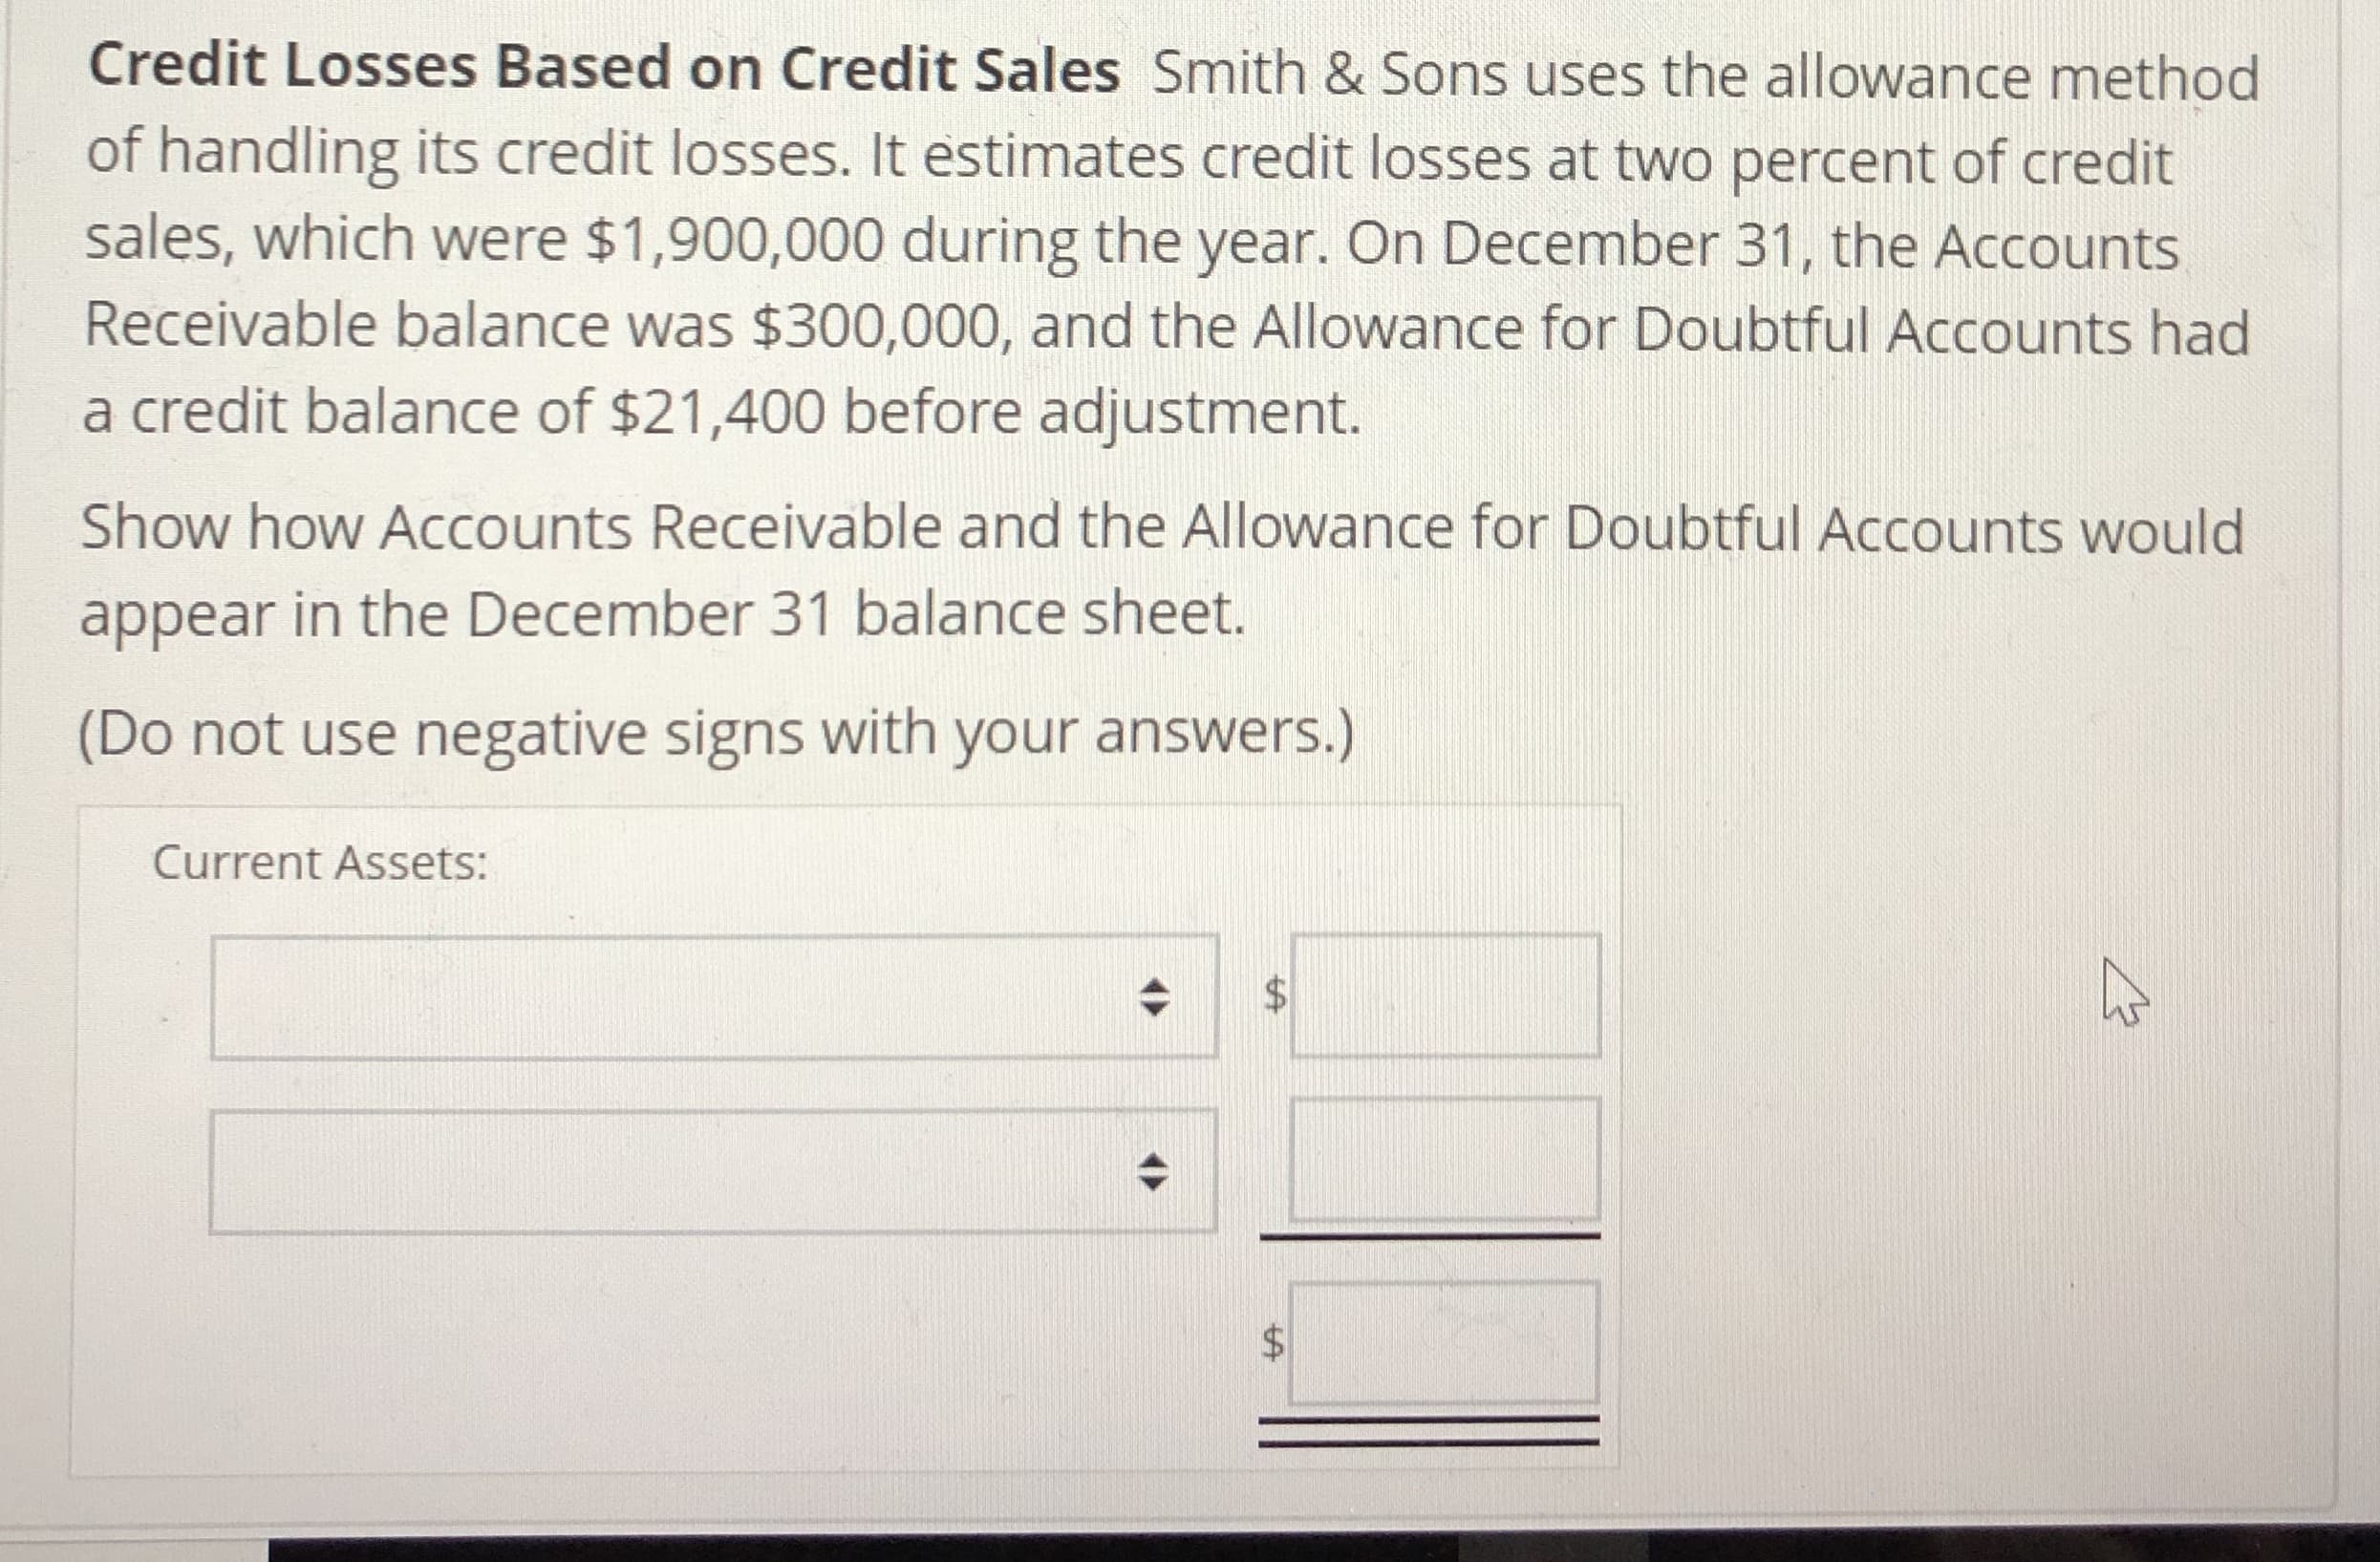 Credit Losses Based on Credit Sales Smith & Sons uses the allowance method
of handling its credit losses. It estimates credit losses at two percent of credit
sales, which were $1,900,000 during the year. On December 31, the Accounts
Receivable balance was $300,000, and the Allowance for Doubtful Accounts had
a credit balance of $21,400 before adjustment.
Show how Accounts Receivable and the Allowance for Doubtful Accounts would
appear in the December 31 balance sheet.
(Do not use negative signs with your answers.)
Current Assets:
